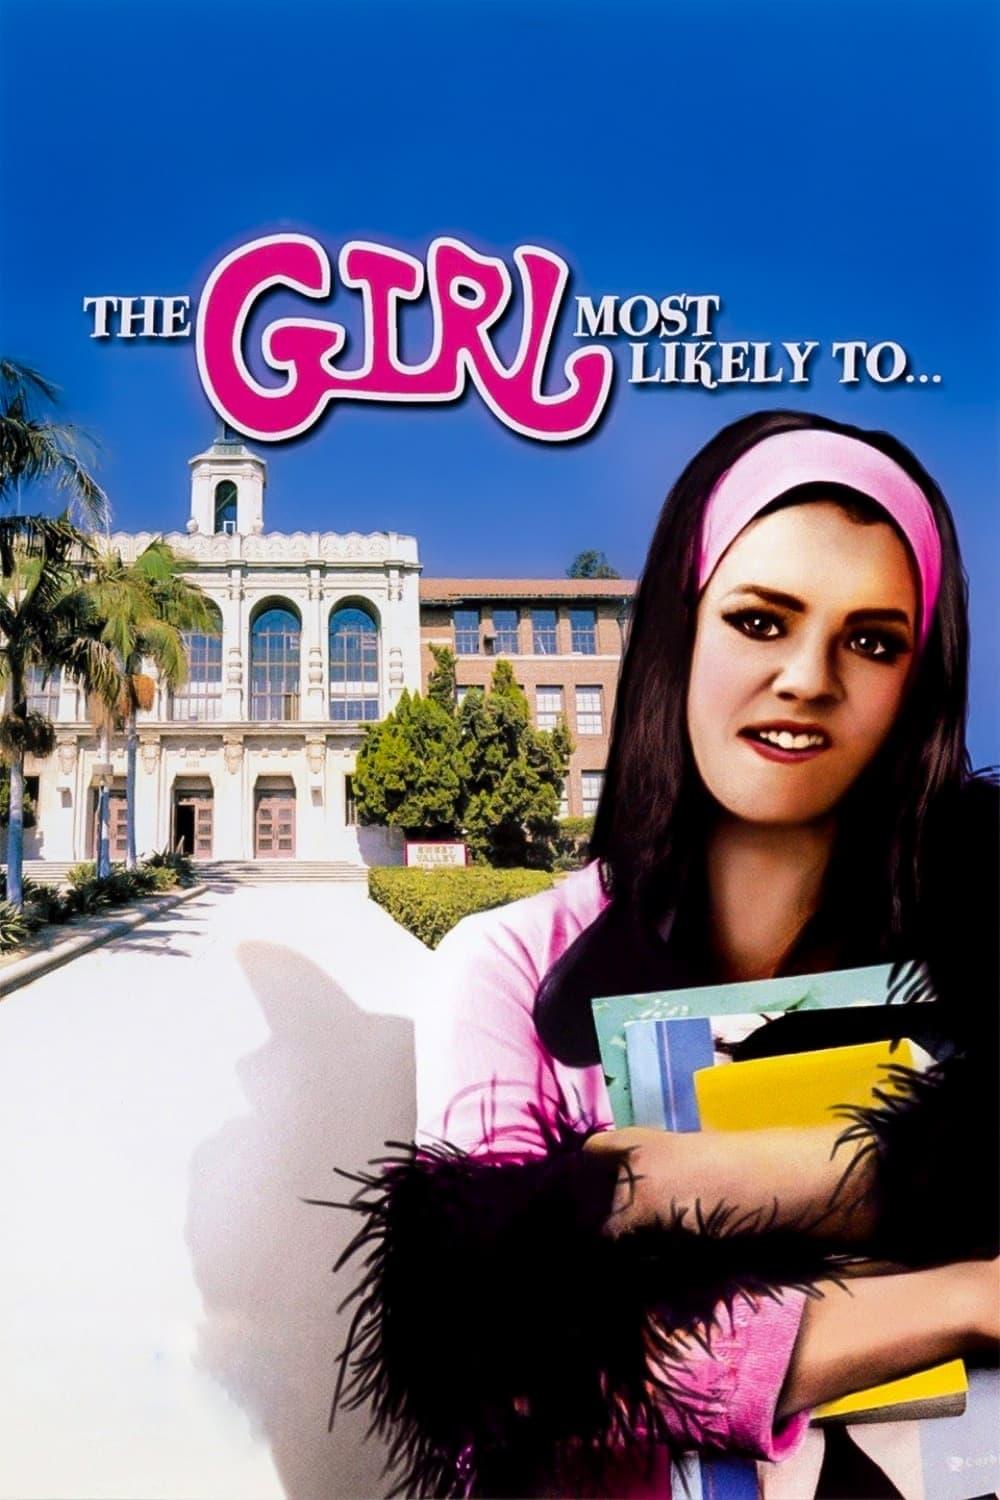 The Girl Most Likely to... poster